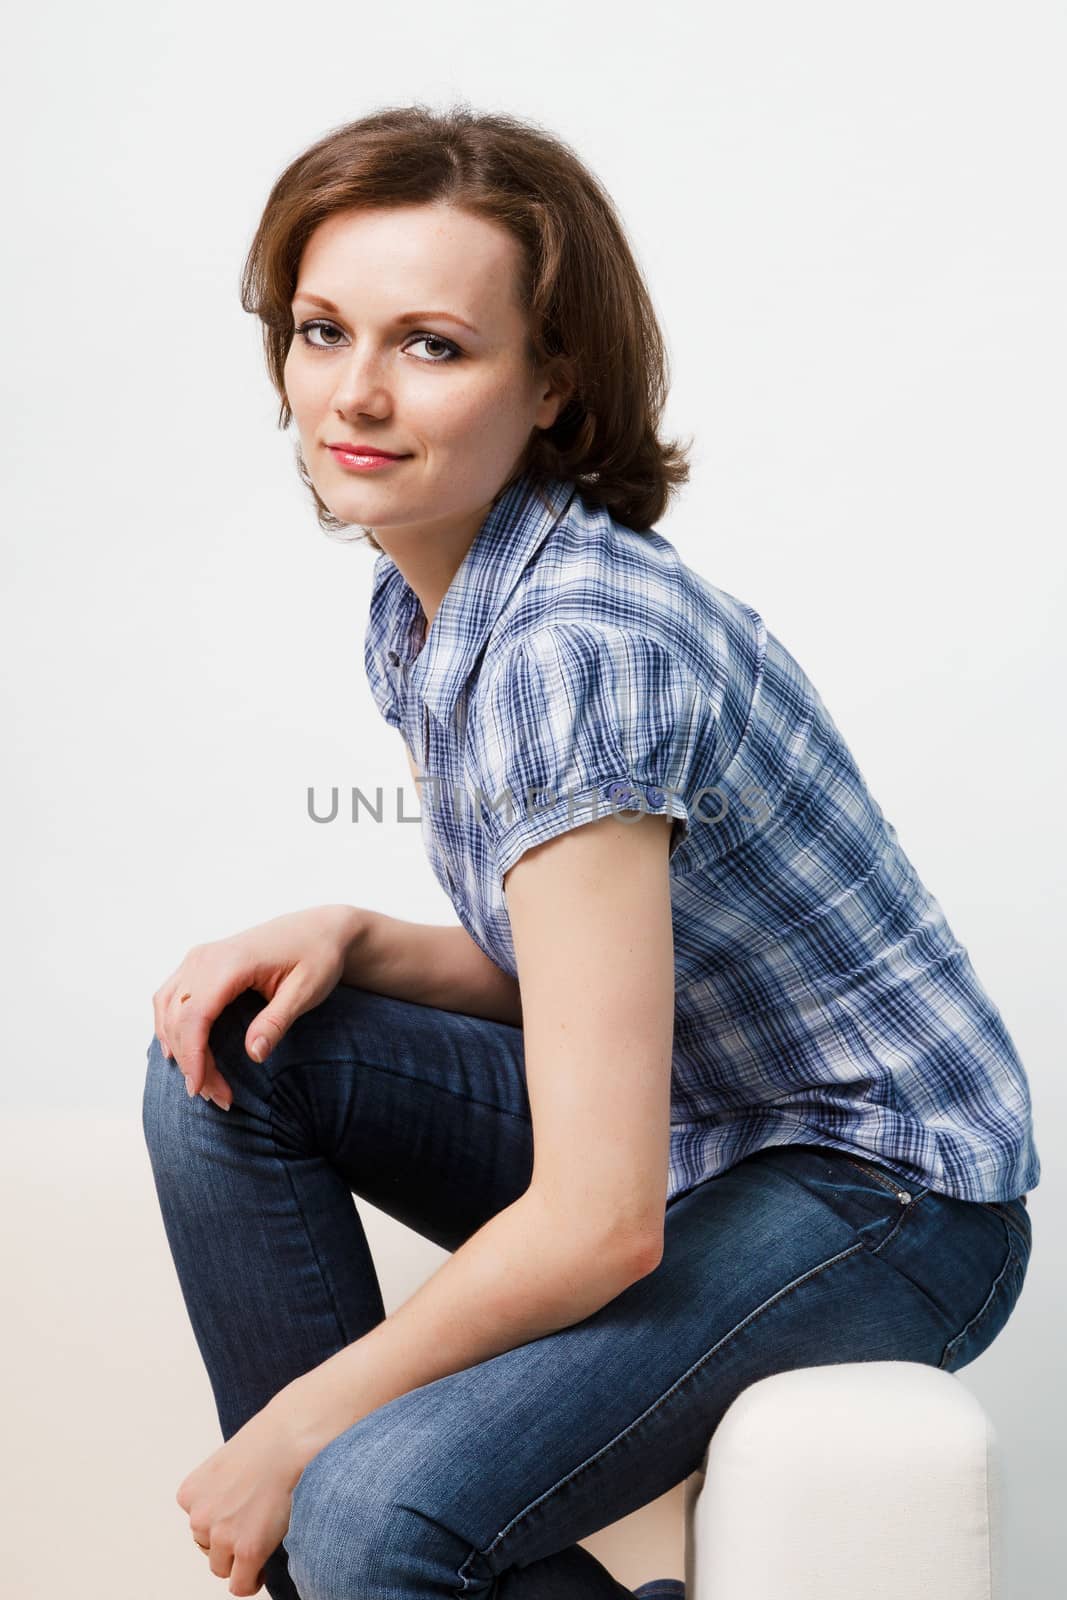 Sitting girl in a plaid shirt and jeans